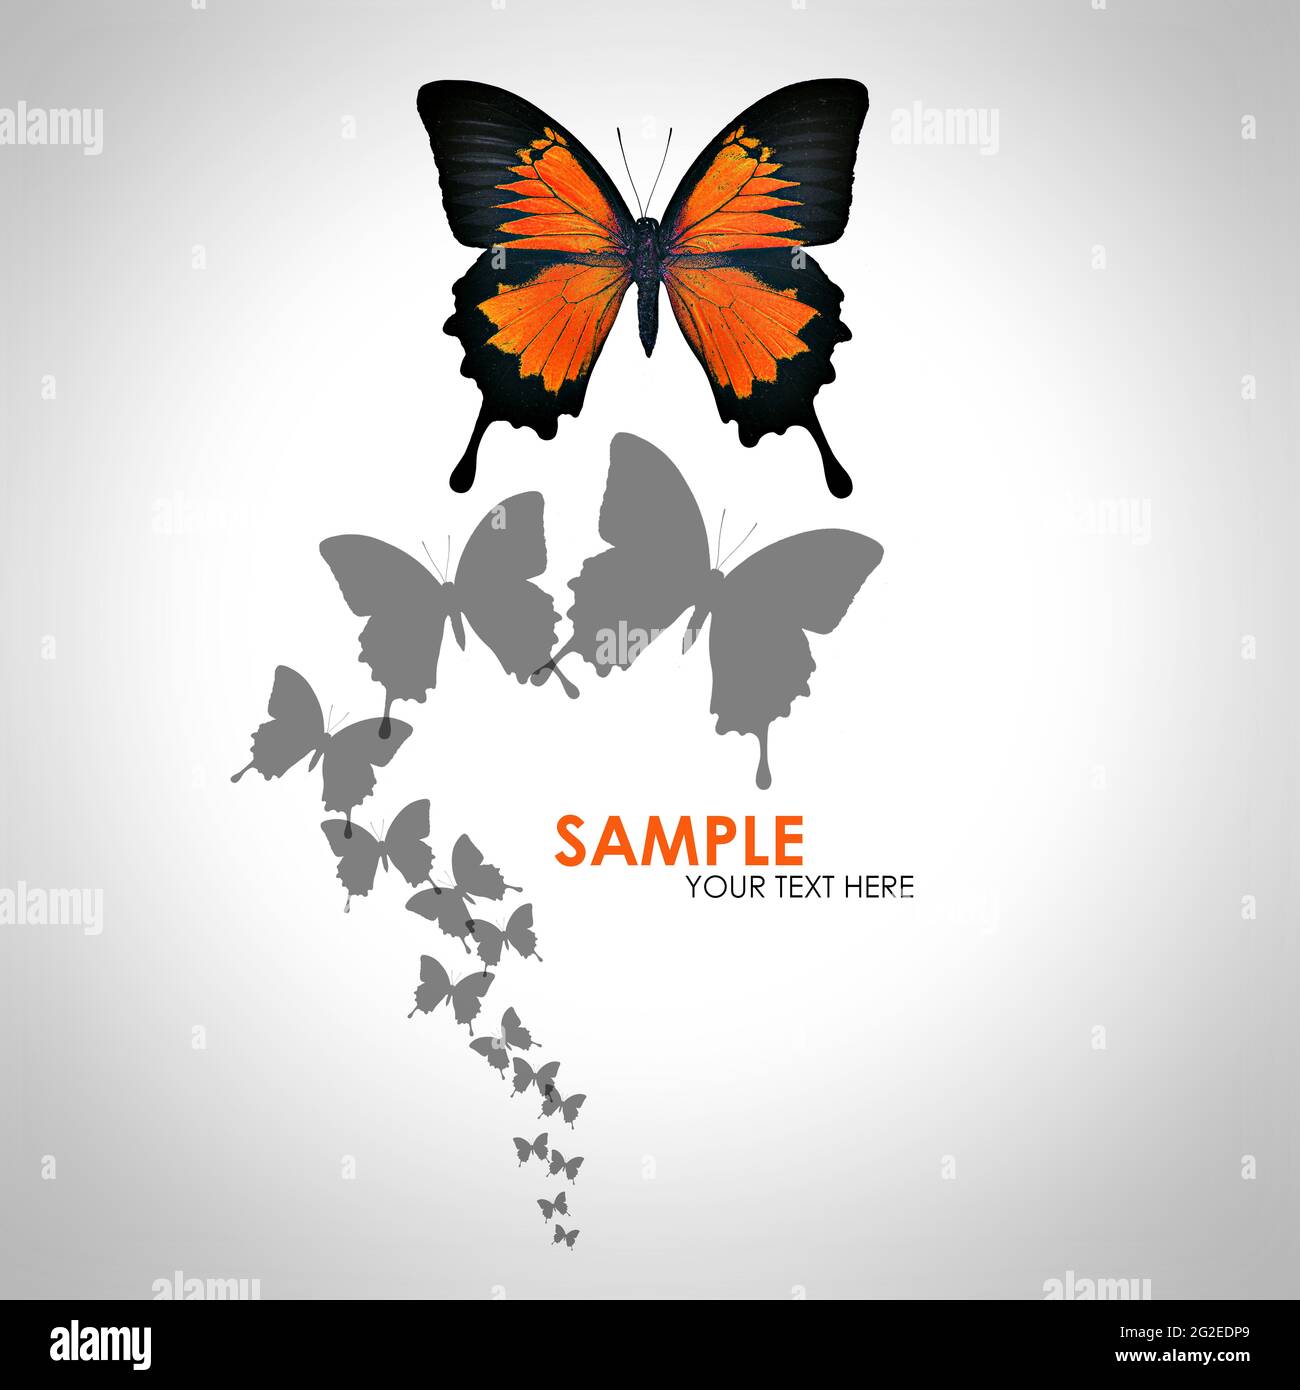 Butterfly background Stock Photo